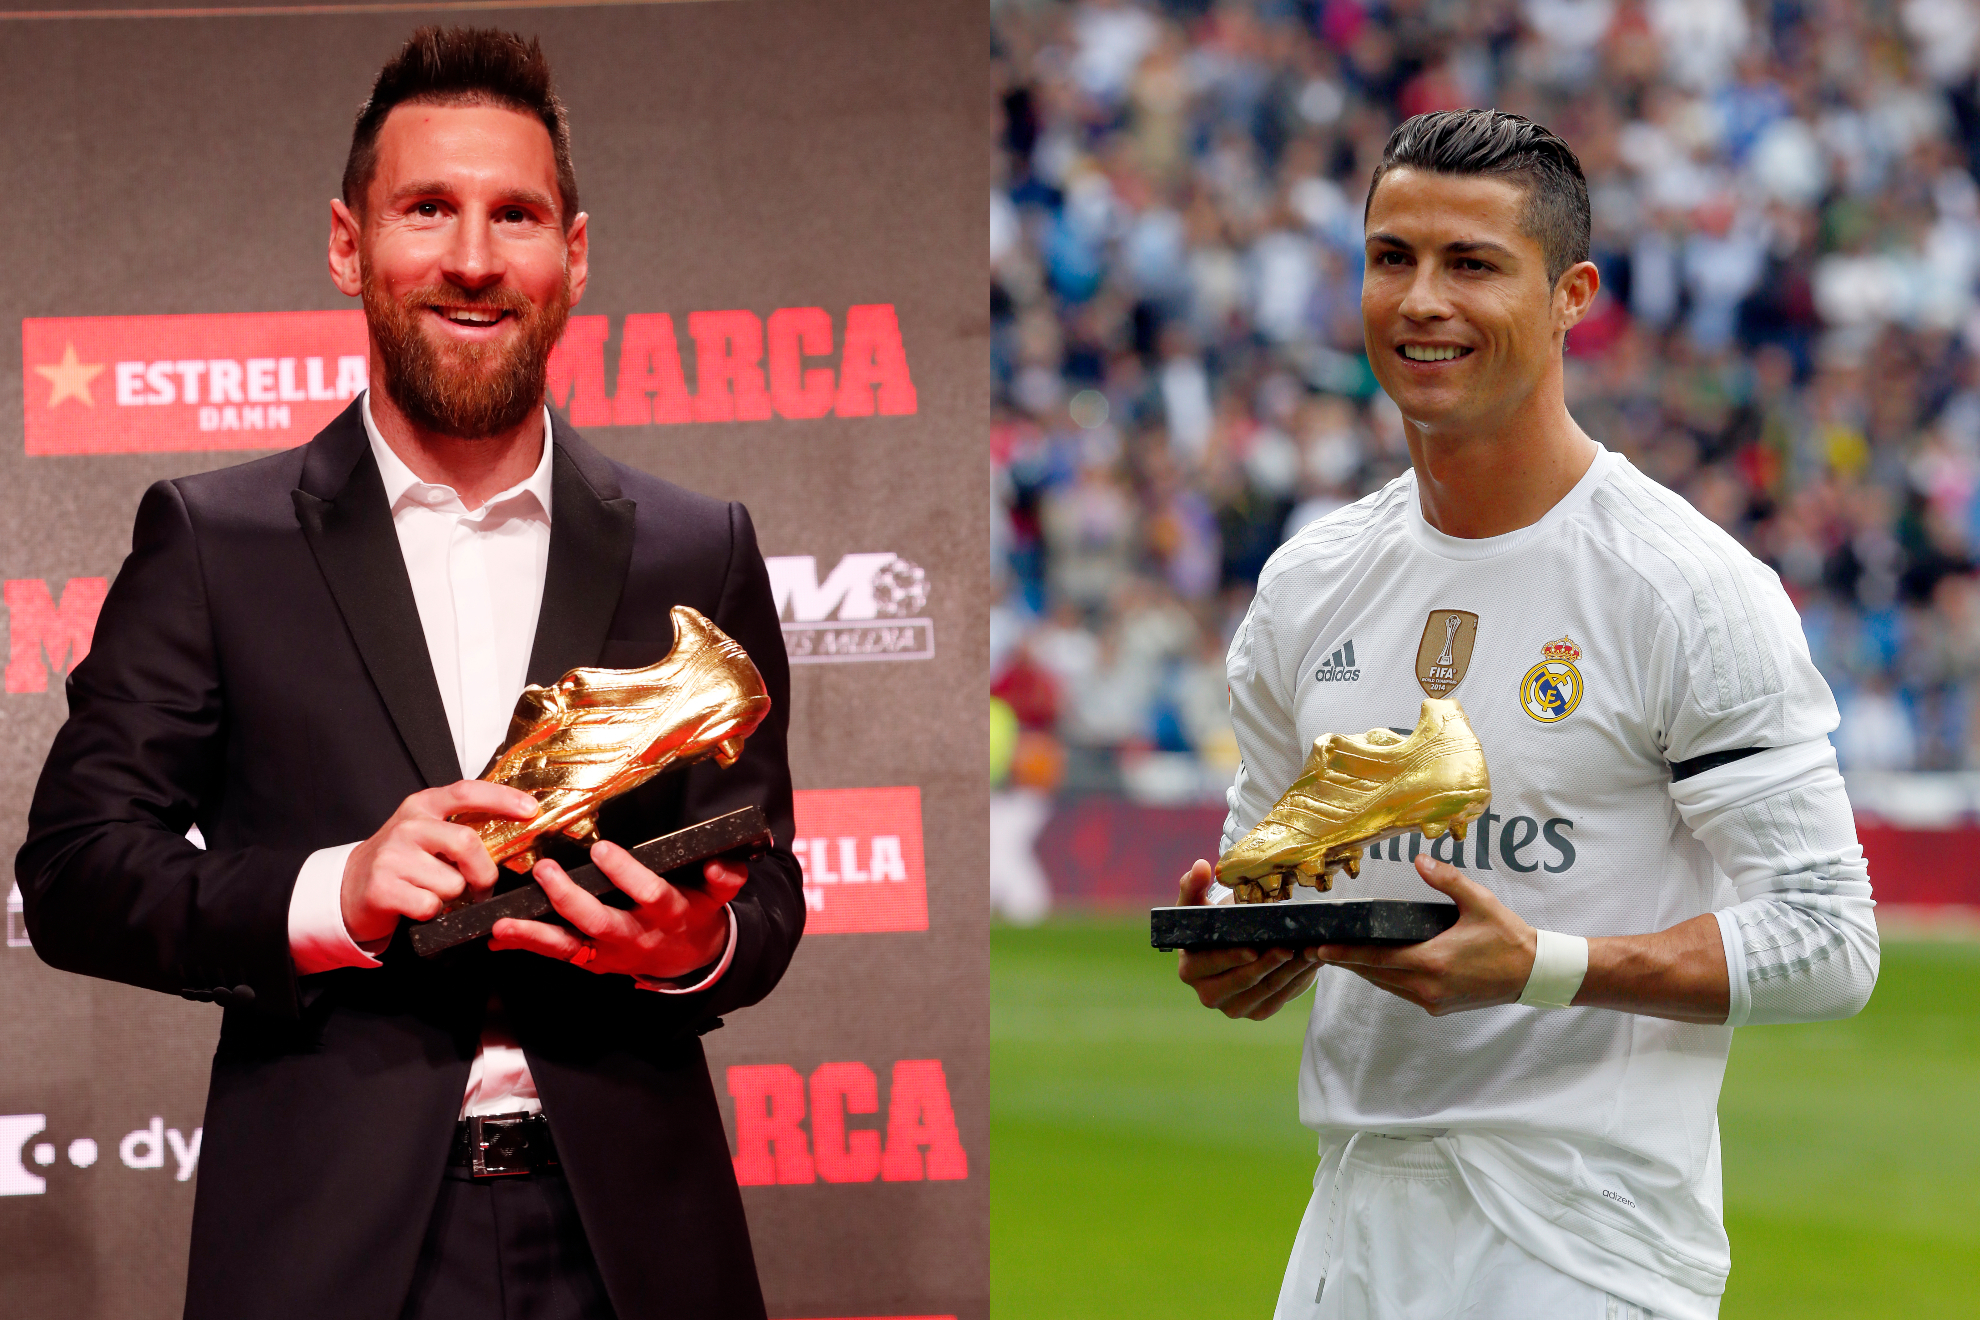 Who has more Golden Boots, Real Madrid or Barcelona?